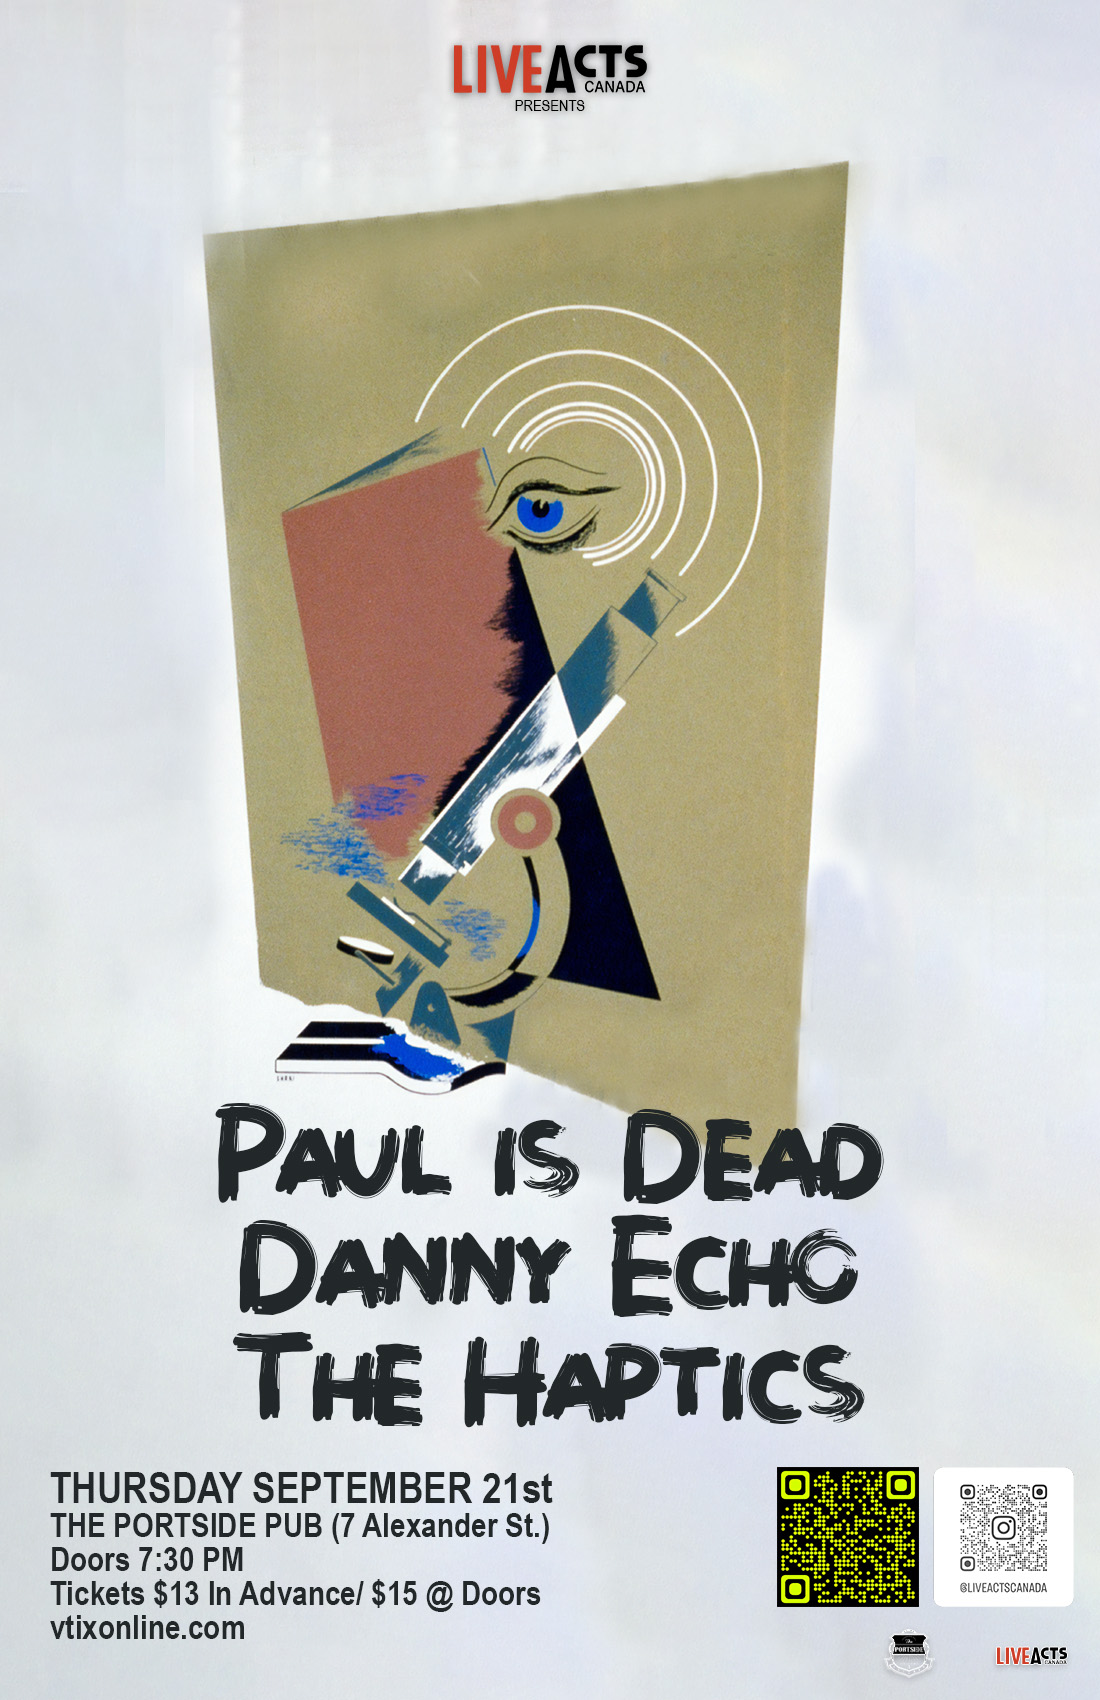 Paul is Dead with Special Guests Danny Echo and The Haptics